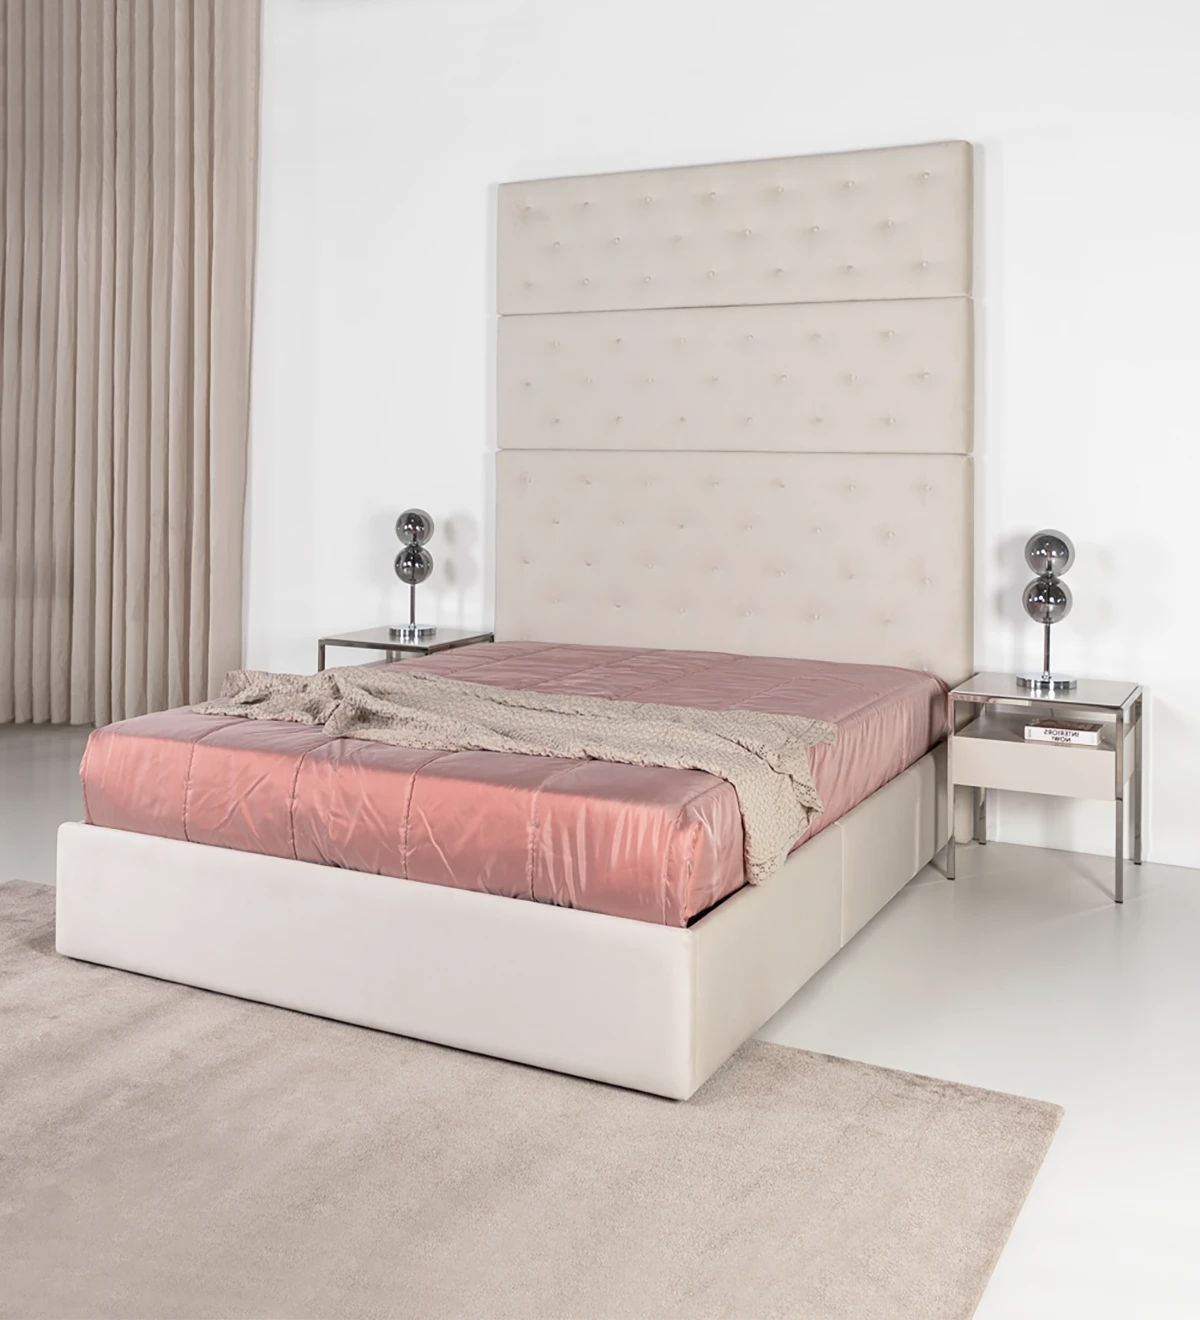 Double sommier upholstered in fabric, with lift-up bed and 2 drawers for storage.